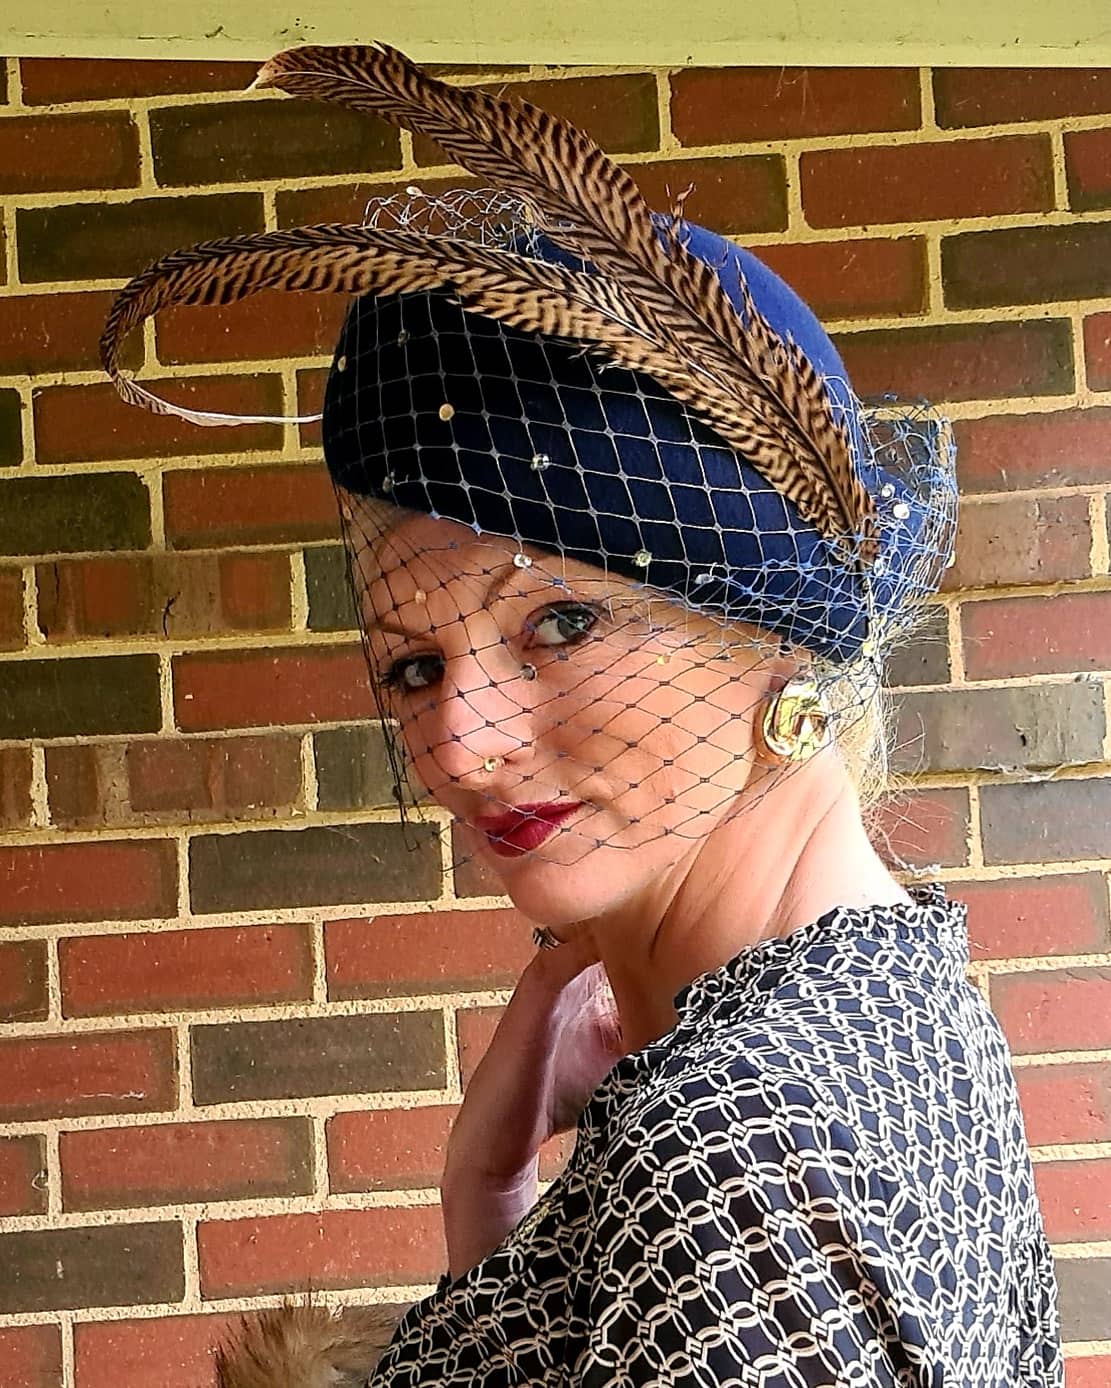 Navy felt veiled vintage blocked hat with sculpted tan feathers